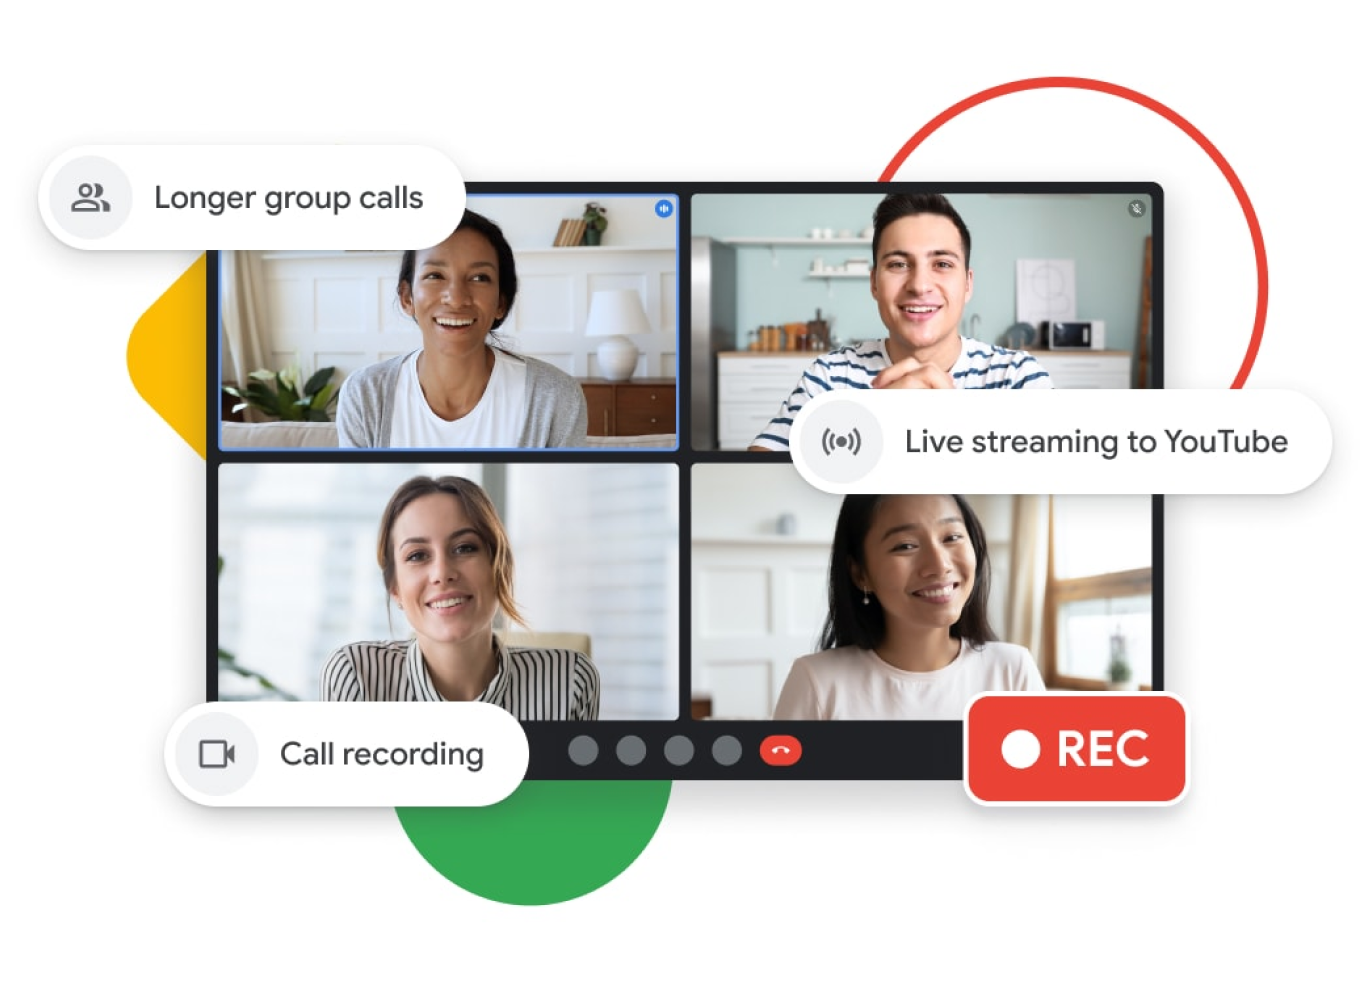 Graphic illustration of a Google Meet call with longer group calls, live streaming to YouTube, and call recording features.